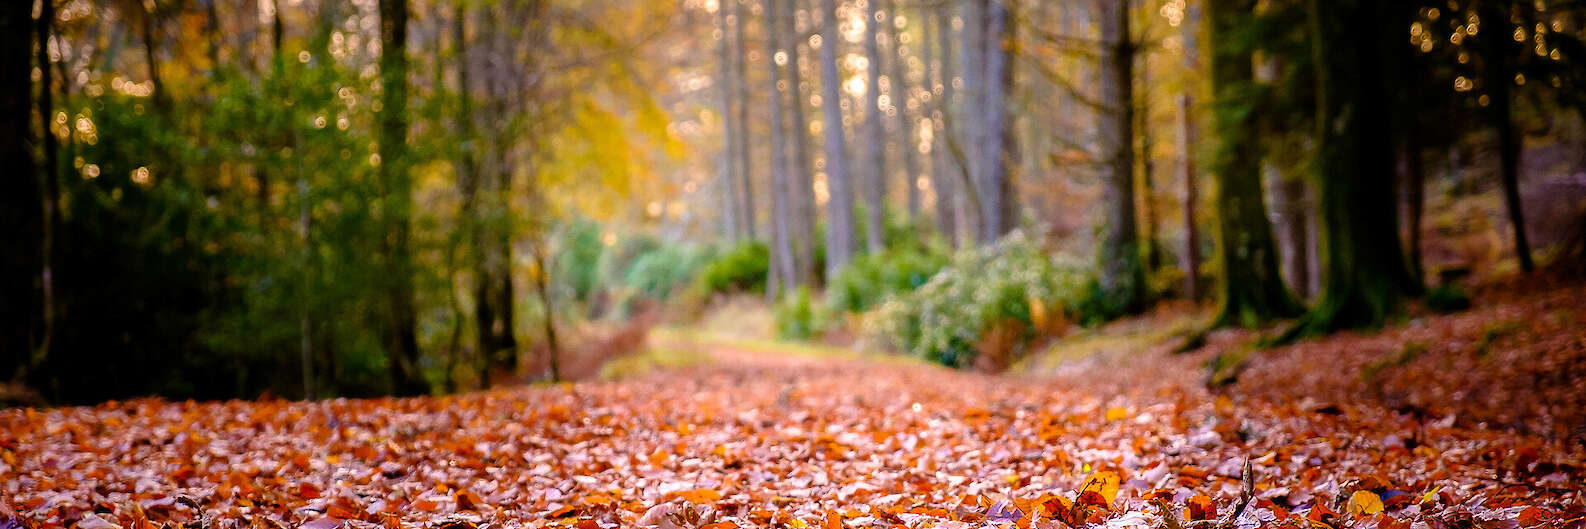 Ardgour Lochans Trail in Autumn | Courtesy of Steven Marshall Photography - www.smarshall-photography.com